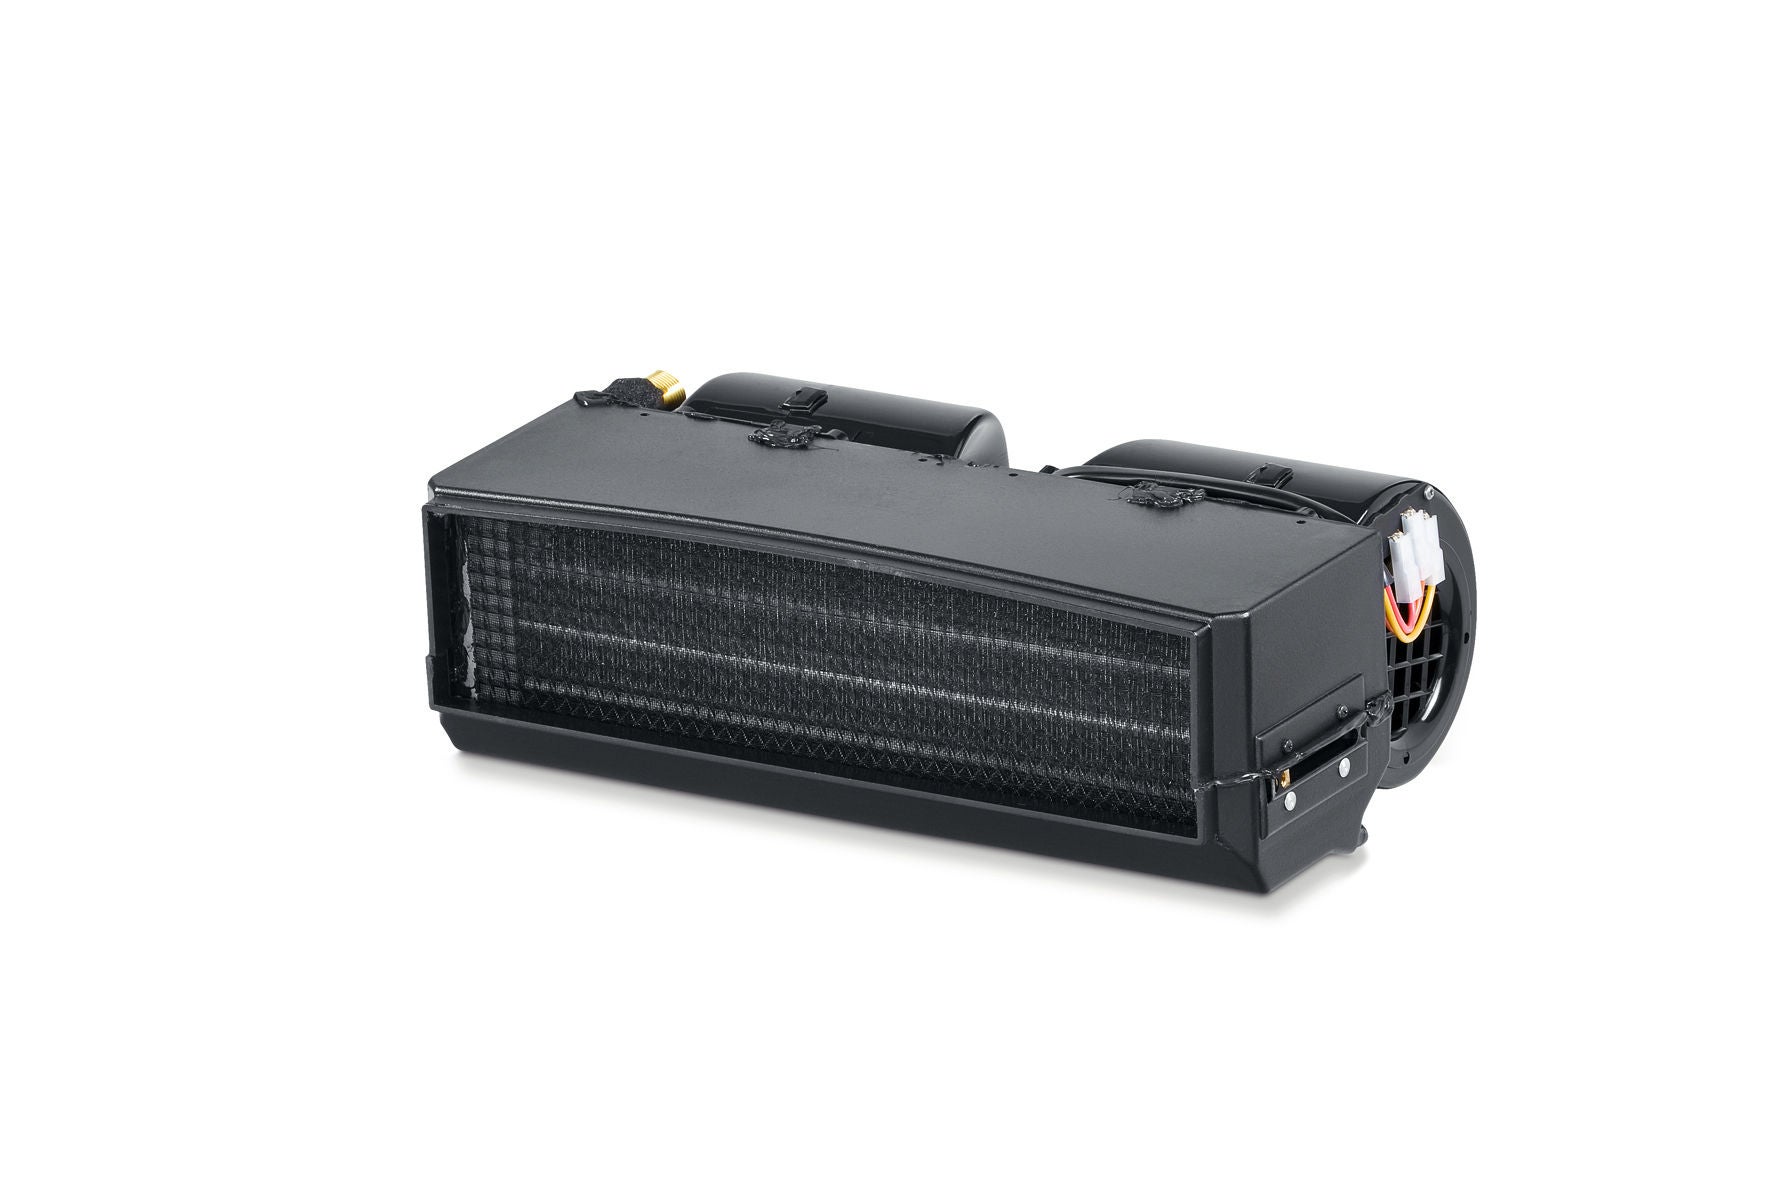 Product picture of Webasto integrated air-conditioning system model Oakland